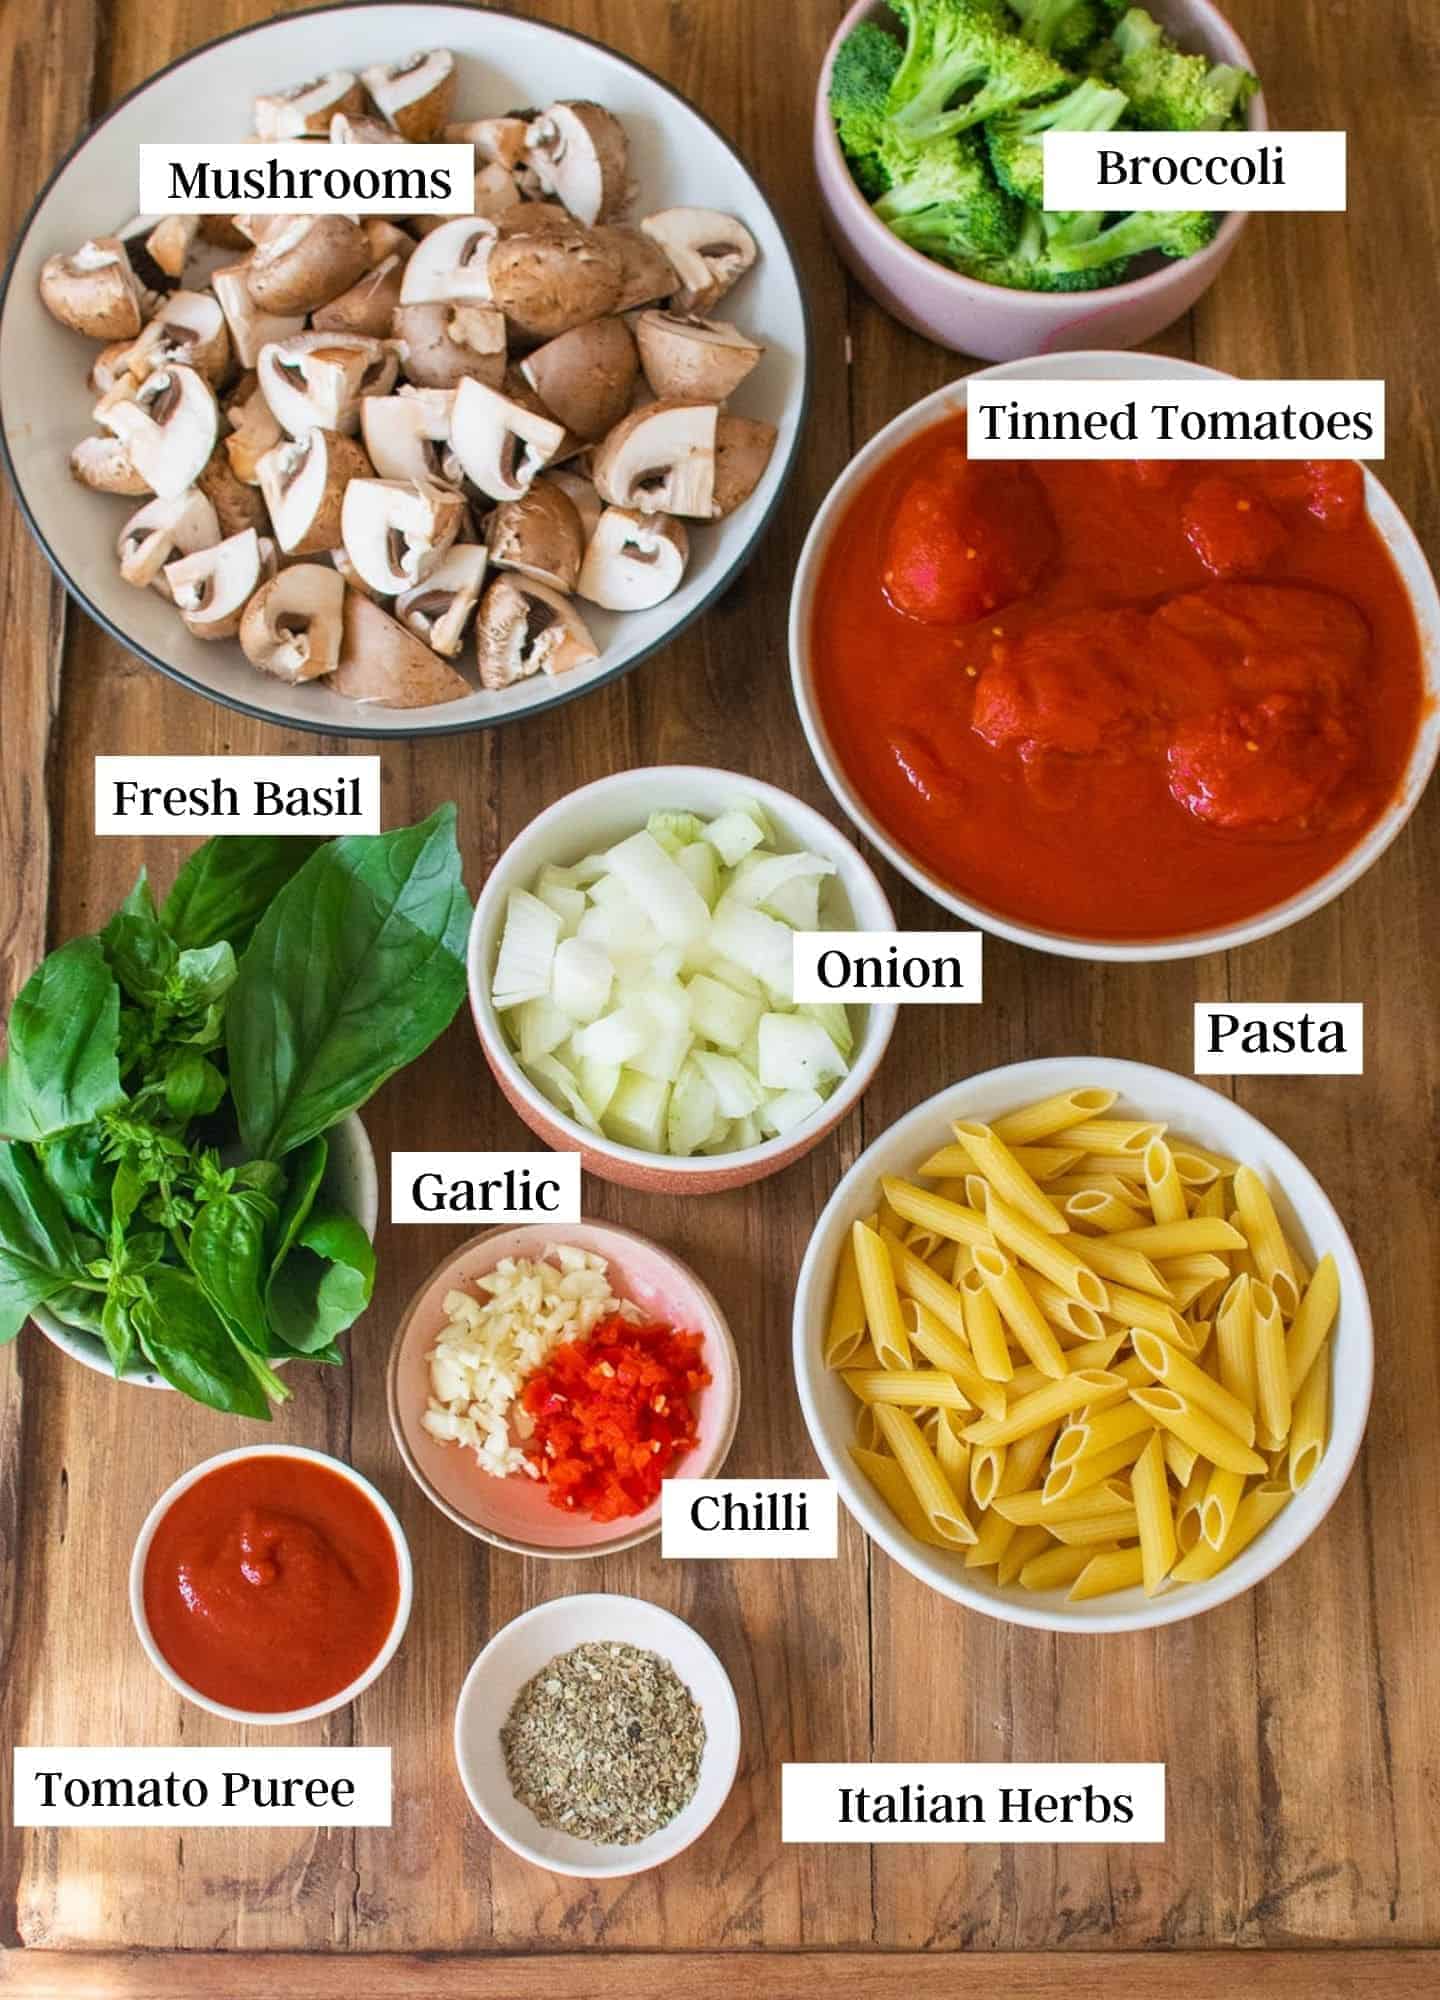 All of the ingredients for this recipe laid out on the table, and each item is labelled. It shows broccoli, tomatoes, mushrooms, onion, basil, chilli, garlic, pasta. tomato puree and Italian herbs